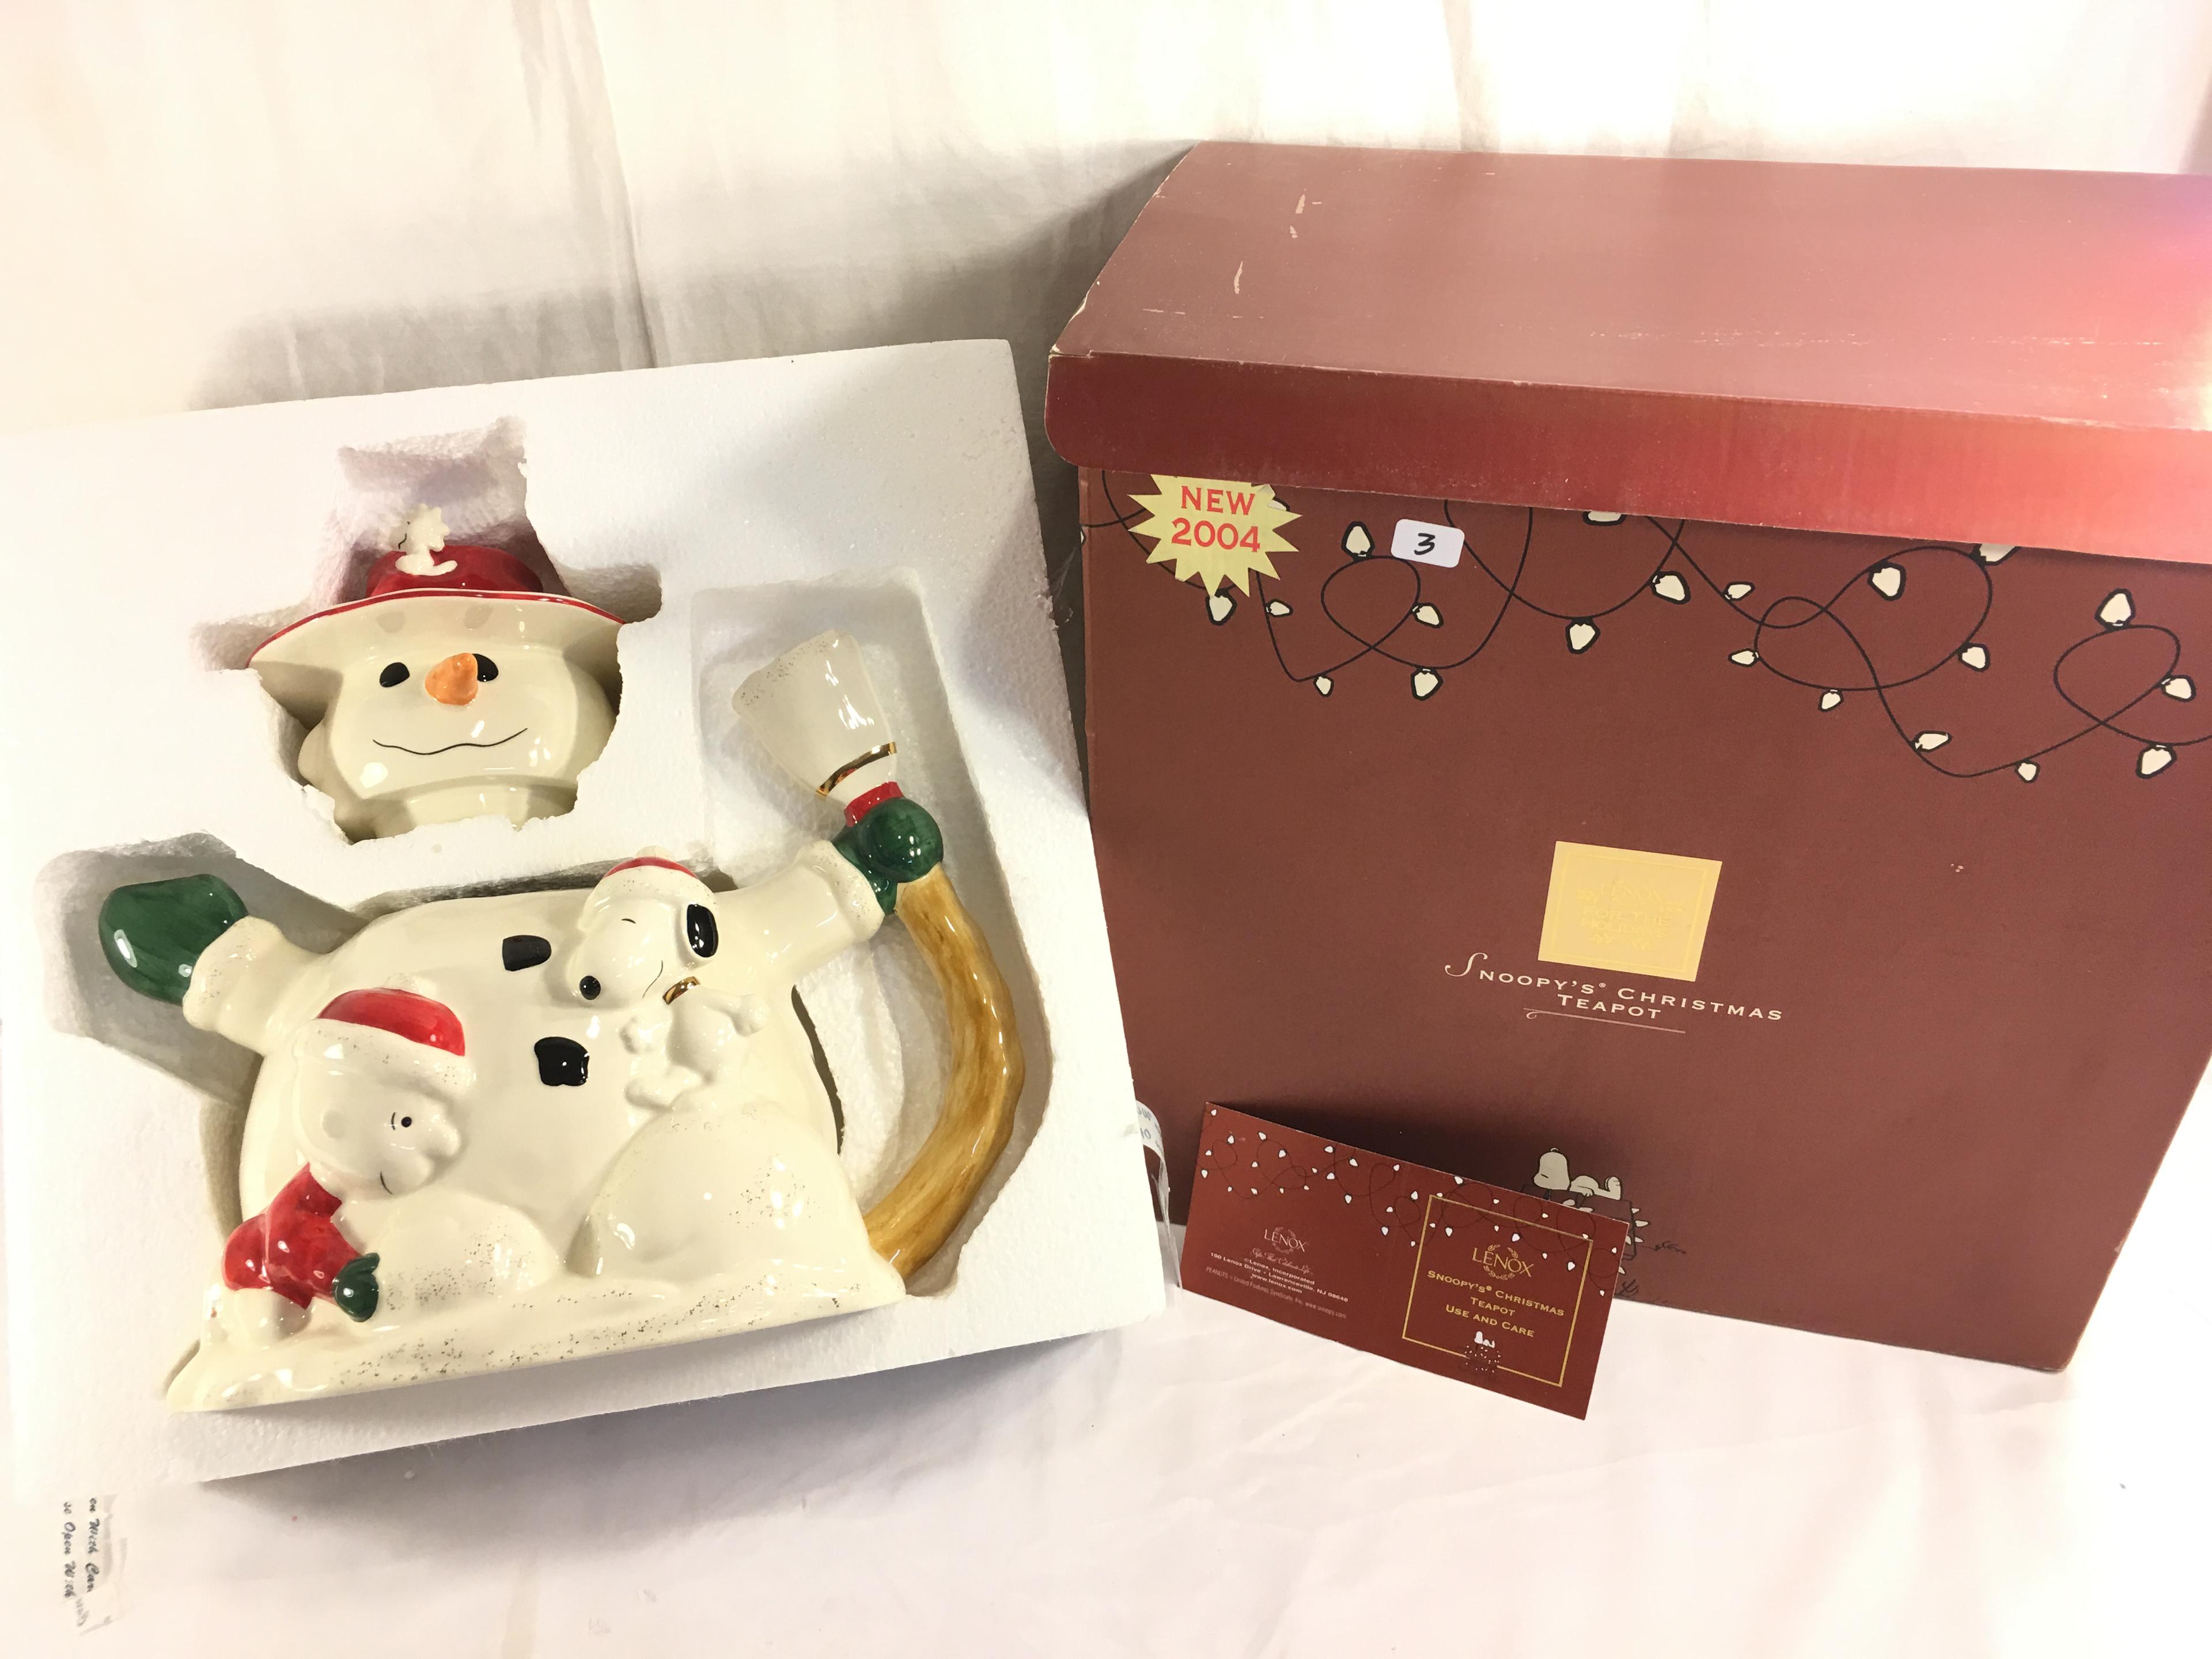 Collector Lenox Peanuts 2004 Snoopy's Christmas Cookie Jar Box Size: 16x11x12"